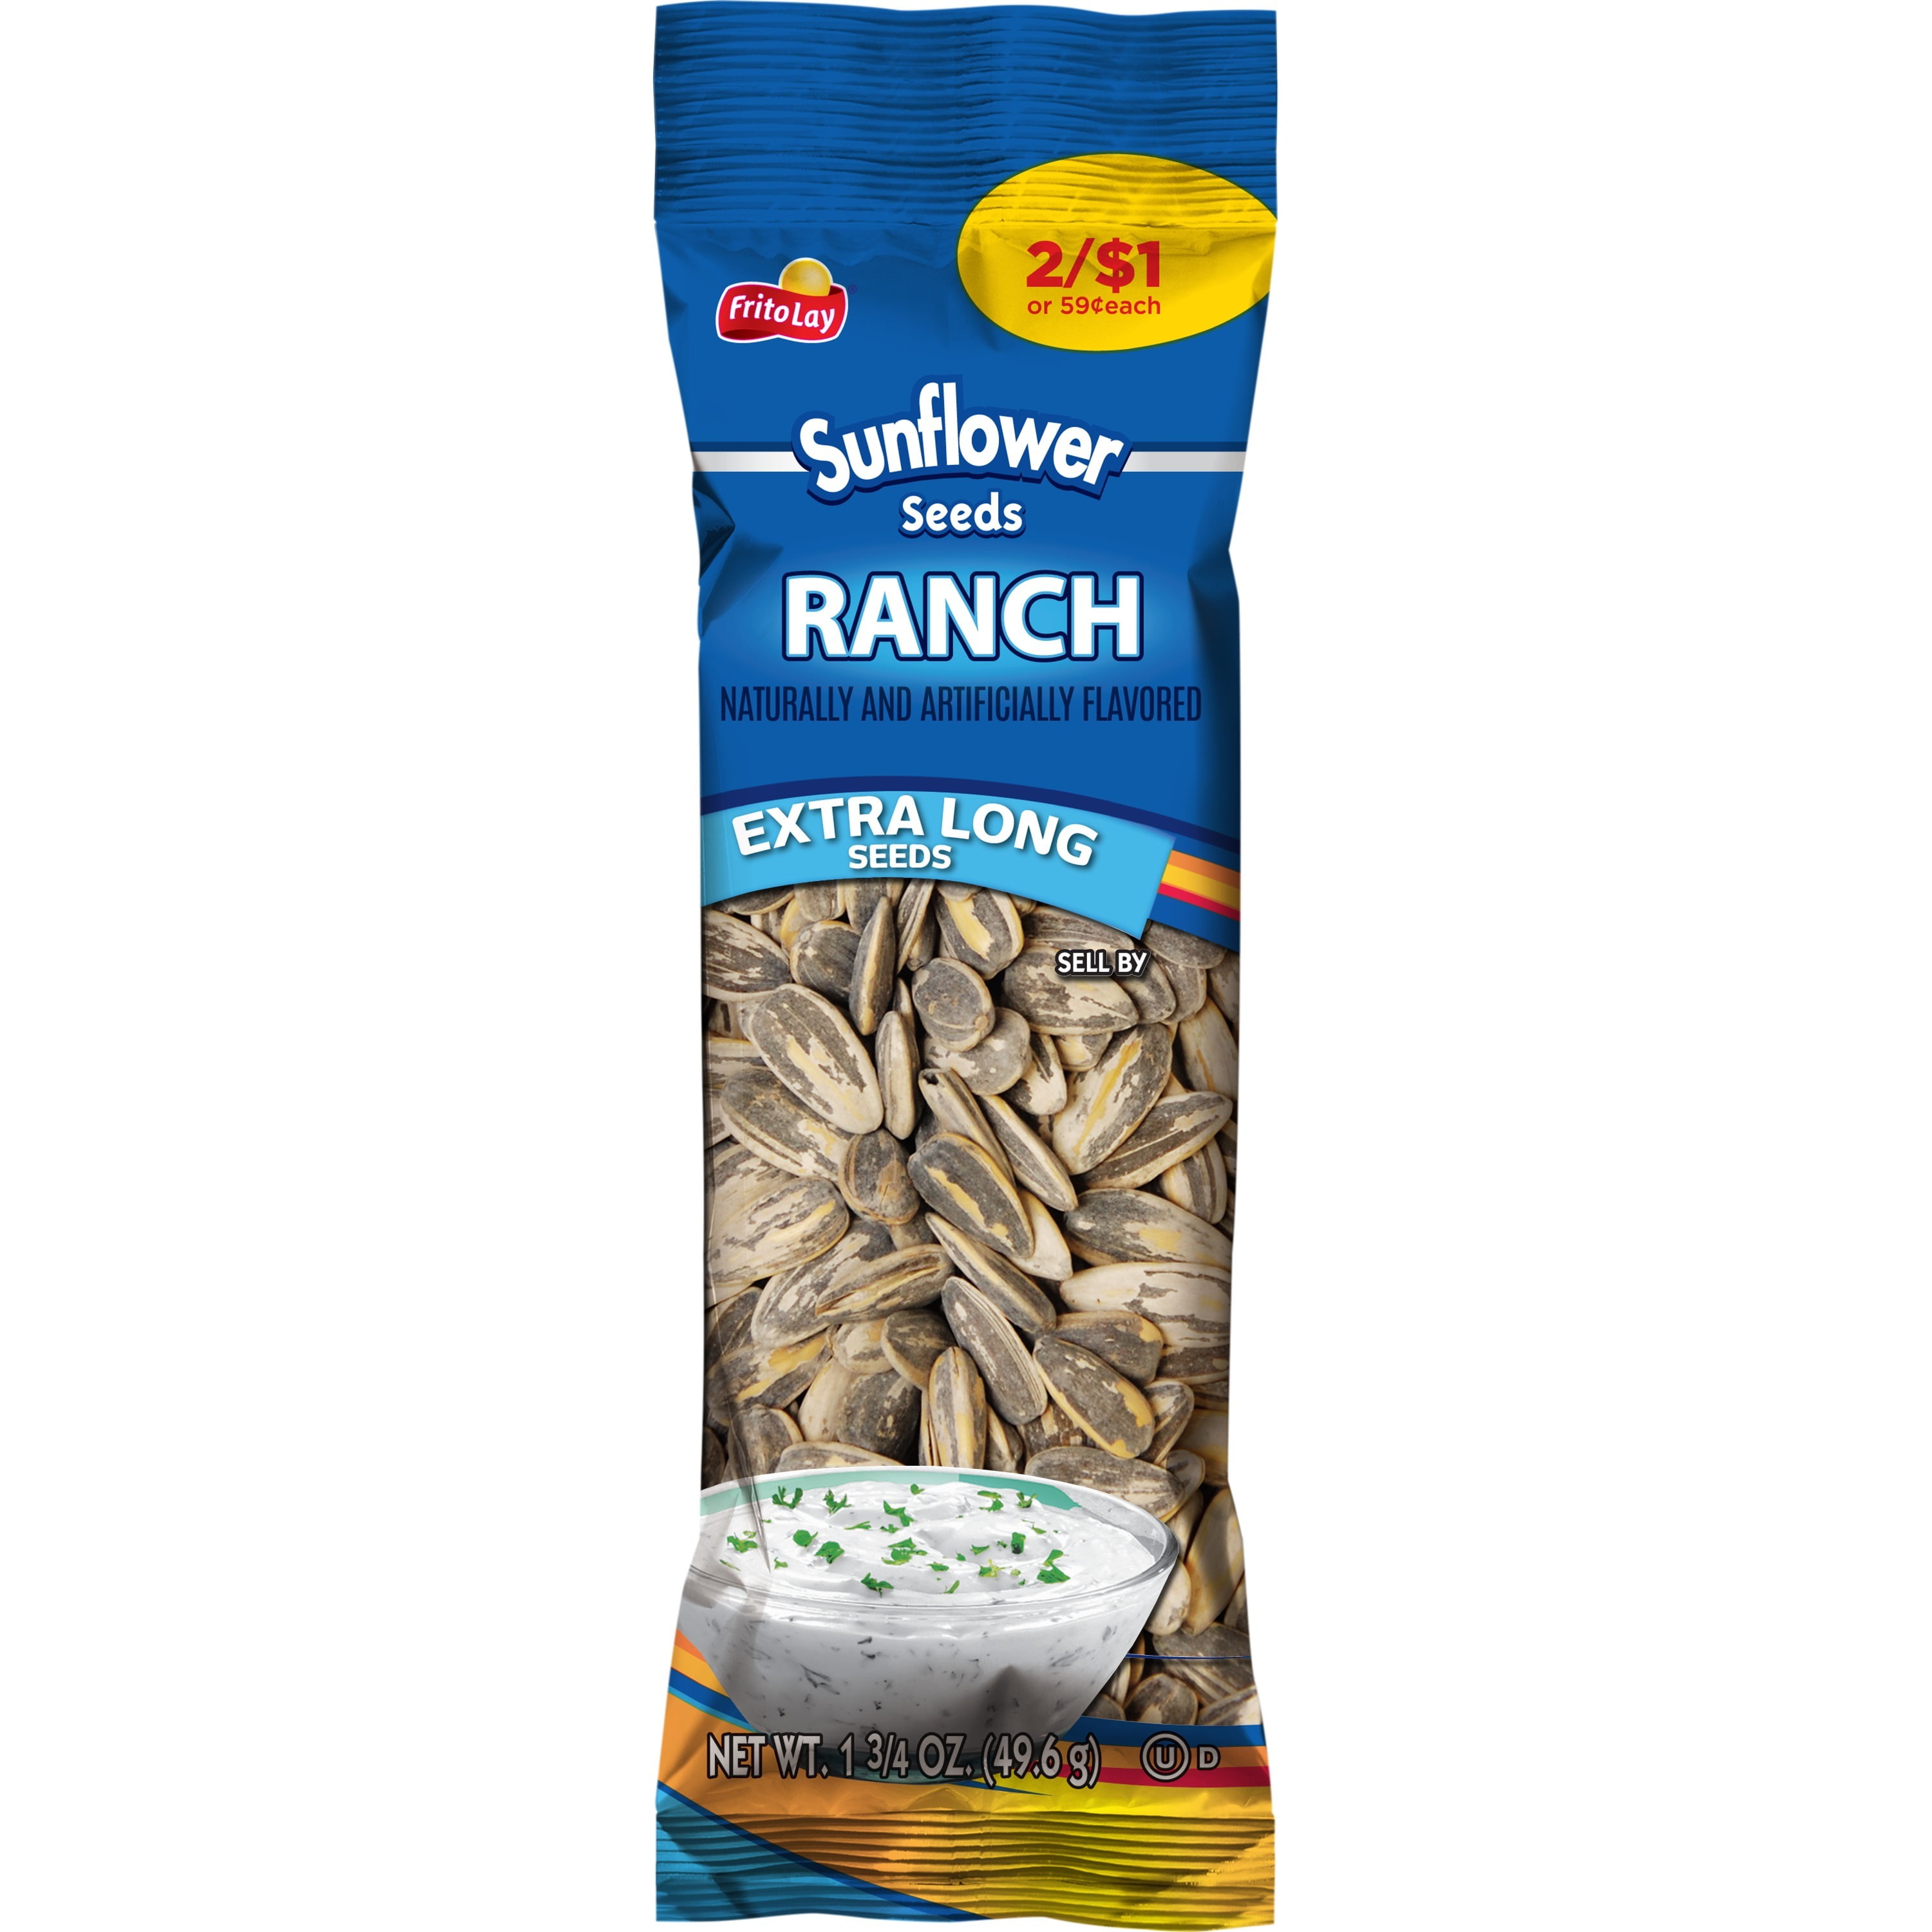 Buy Frito-Lay Extra Long Sunflower Seeds, Ranch Flavor, 1.75 oz Bag at Walm...